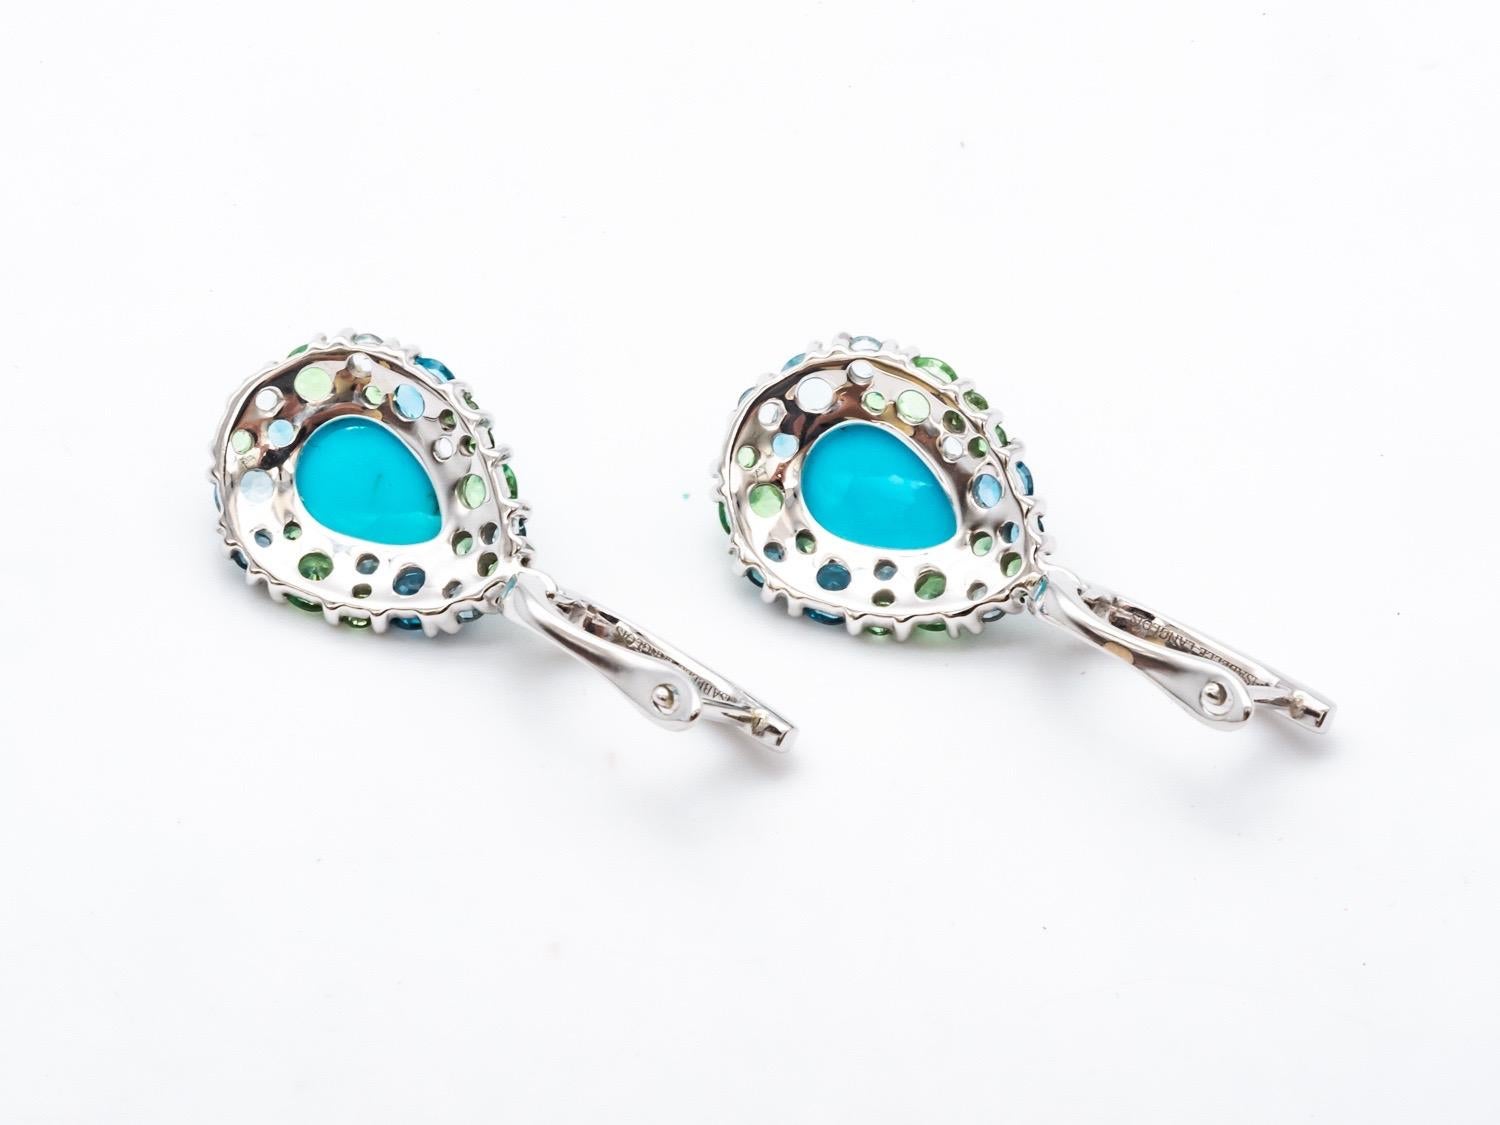 Discover these elegant dangling earrings that embody timeless beauty. Crafted with topaz, tsavorite, turquoise and diamonds in white gold, these exquisite earrings are designed to catch the light and draw attention with their mesmerizing sparkle.